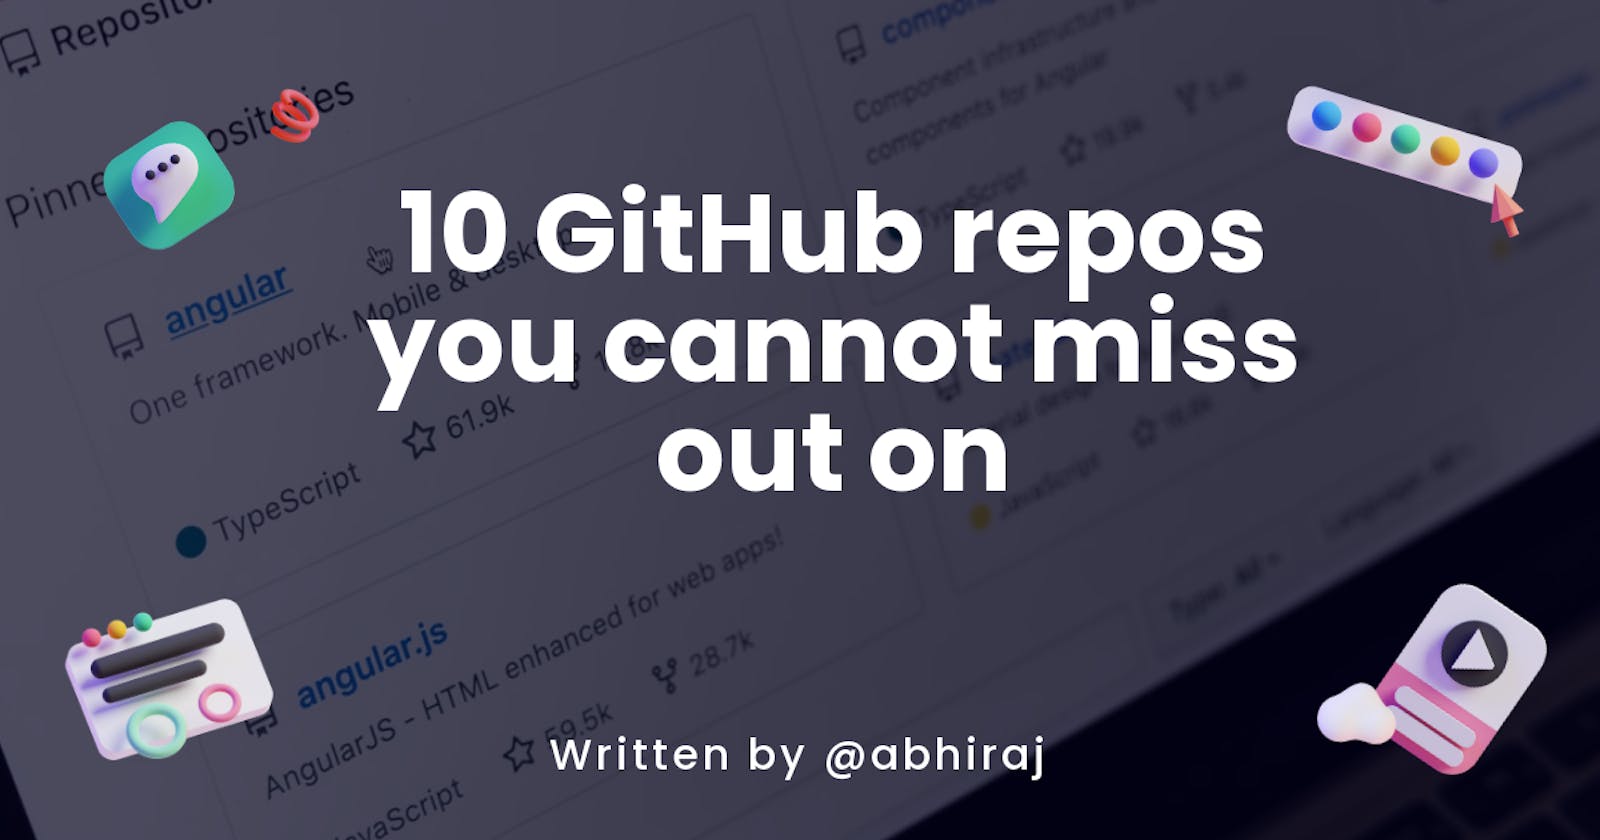 10 GitHub repos you cannot miss out on